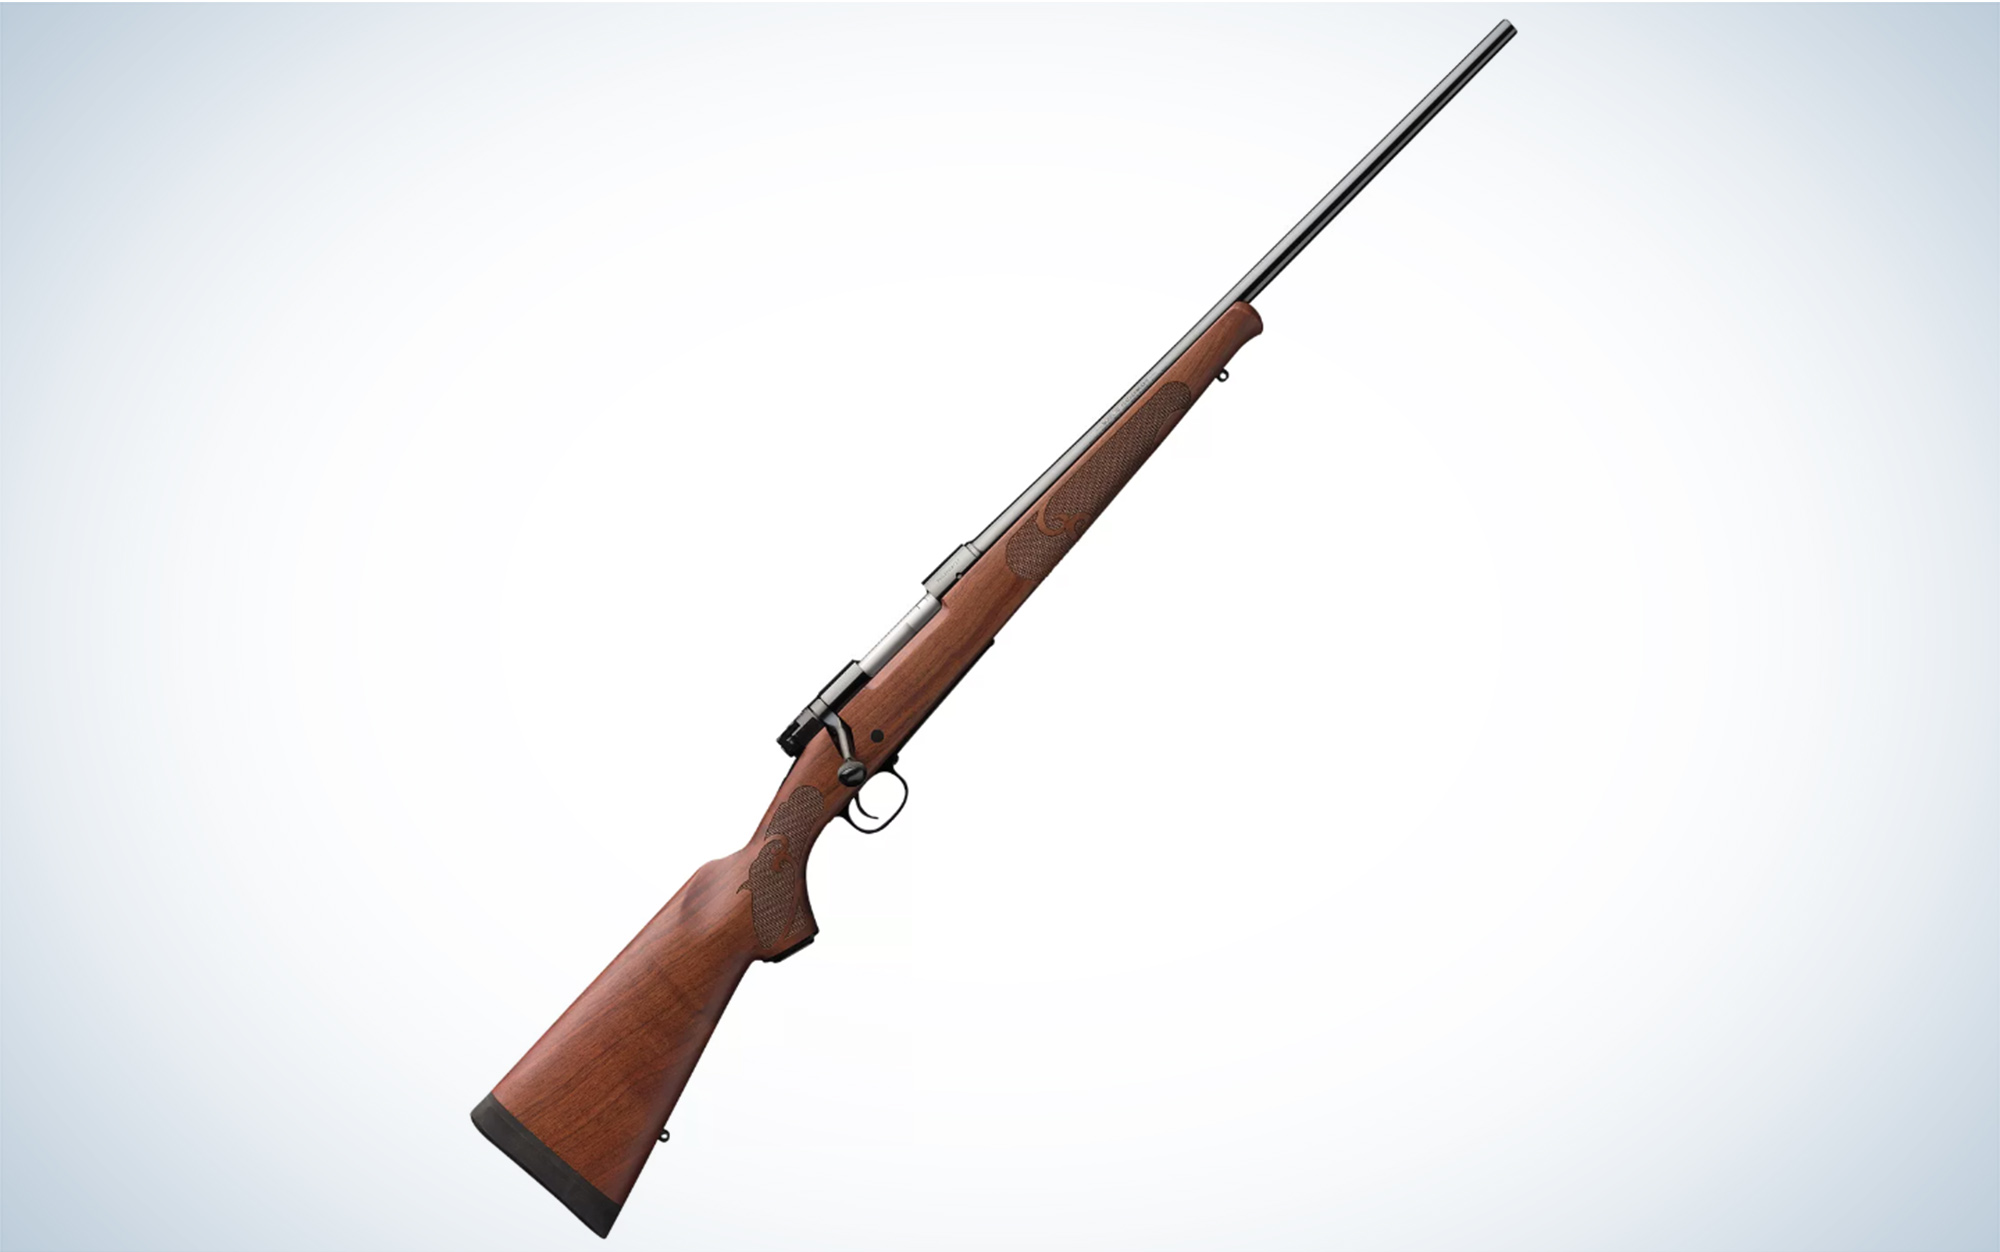 The Winchester Model 70 Featherweight Bolt-Action Rifle is chambered in .270 Winchester.